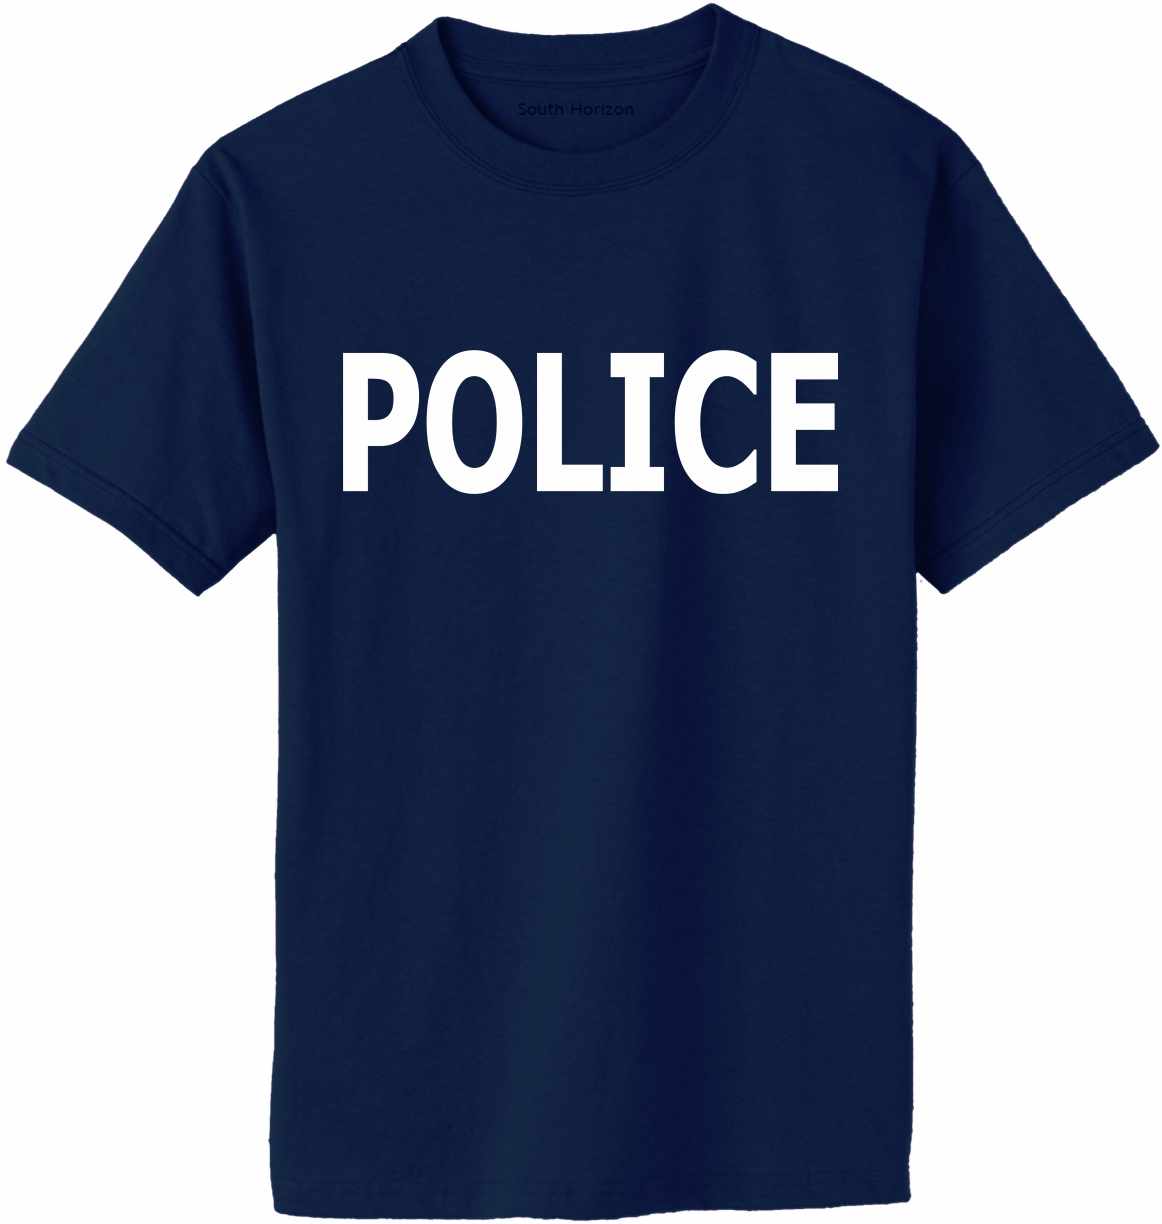 POLICE Adult T-Shirt